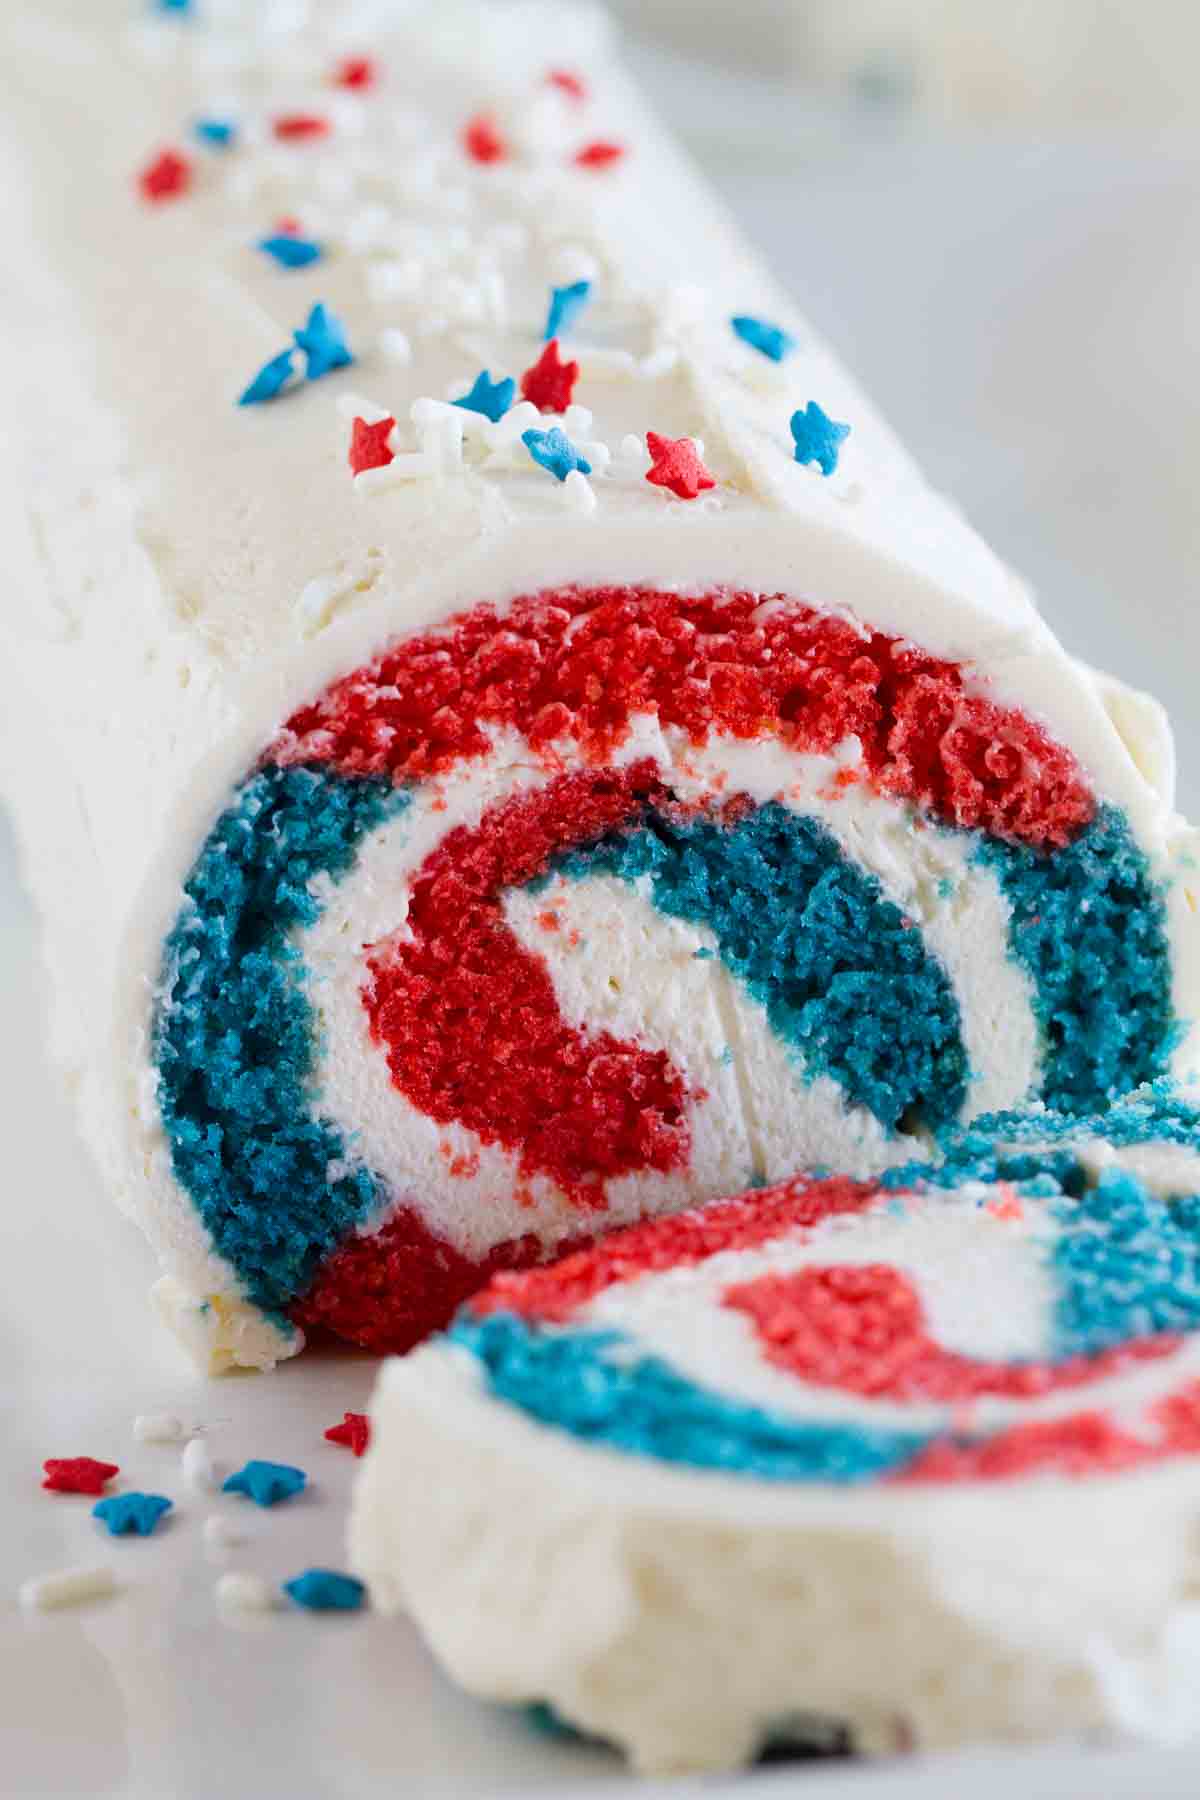 Red White Blue Cake Roll